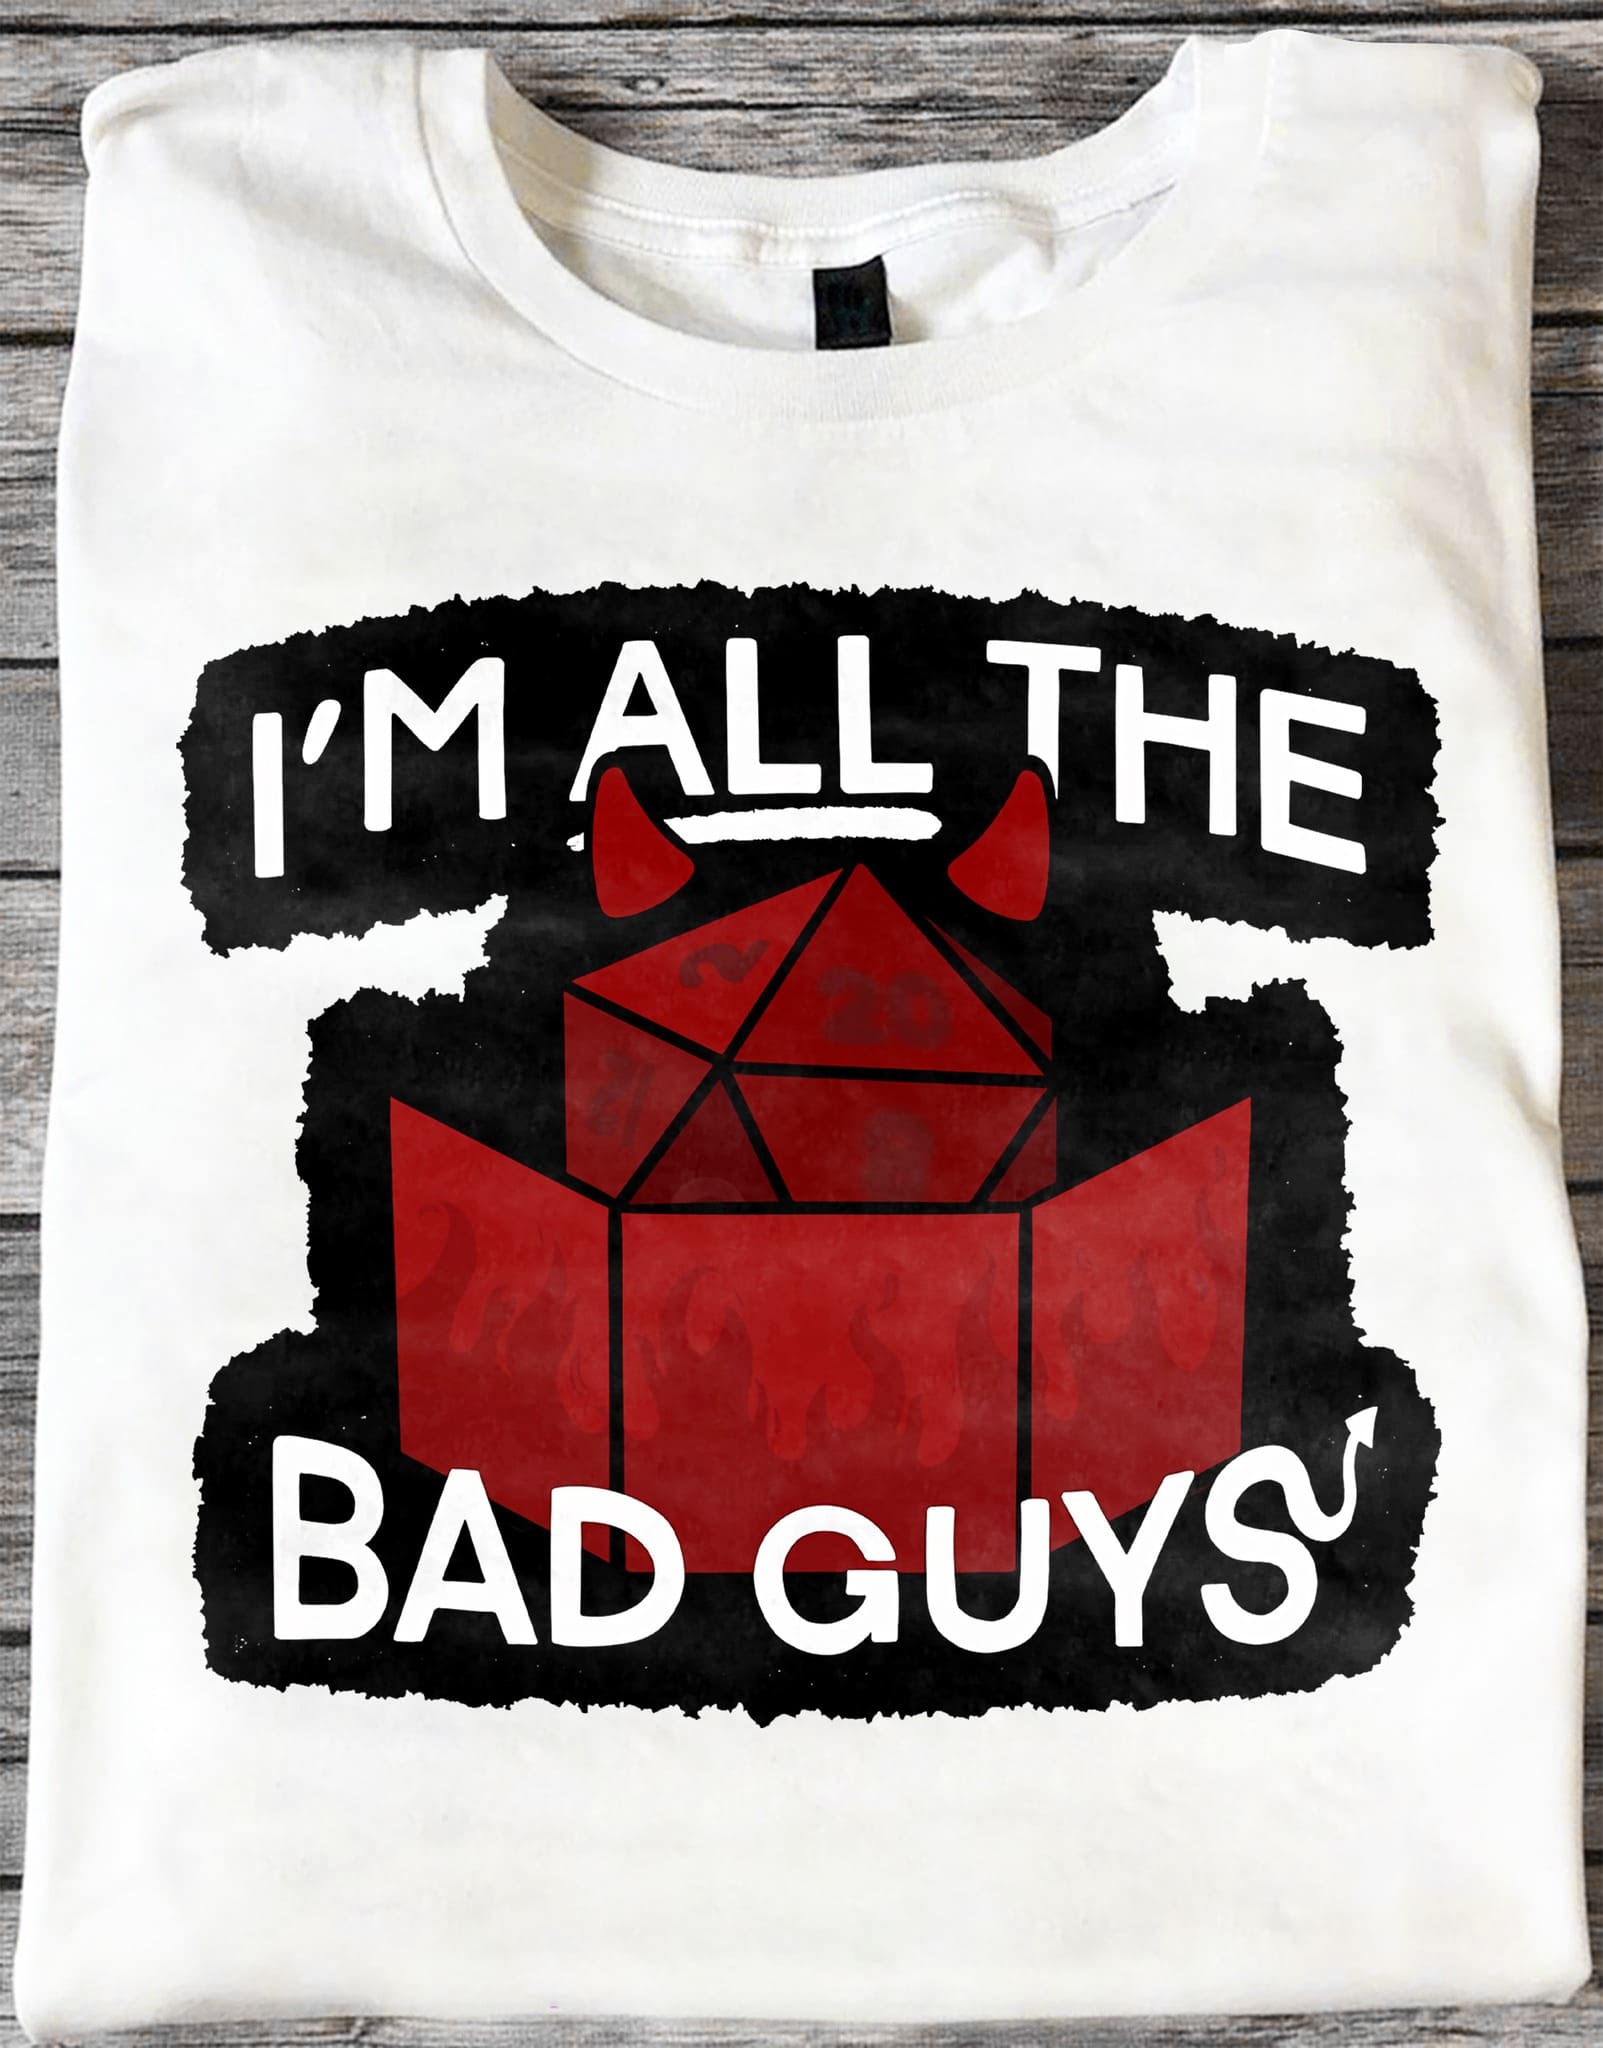 I'm all the bad guys - Devil dices, Dungeons and Dragons